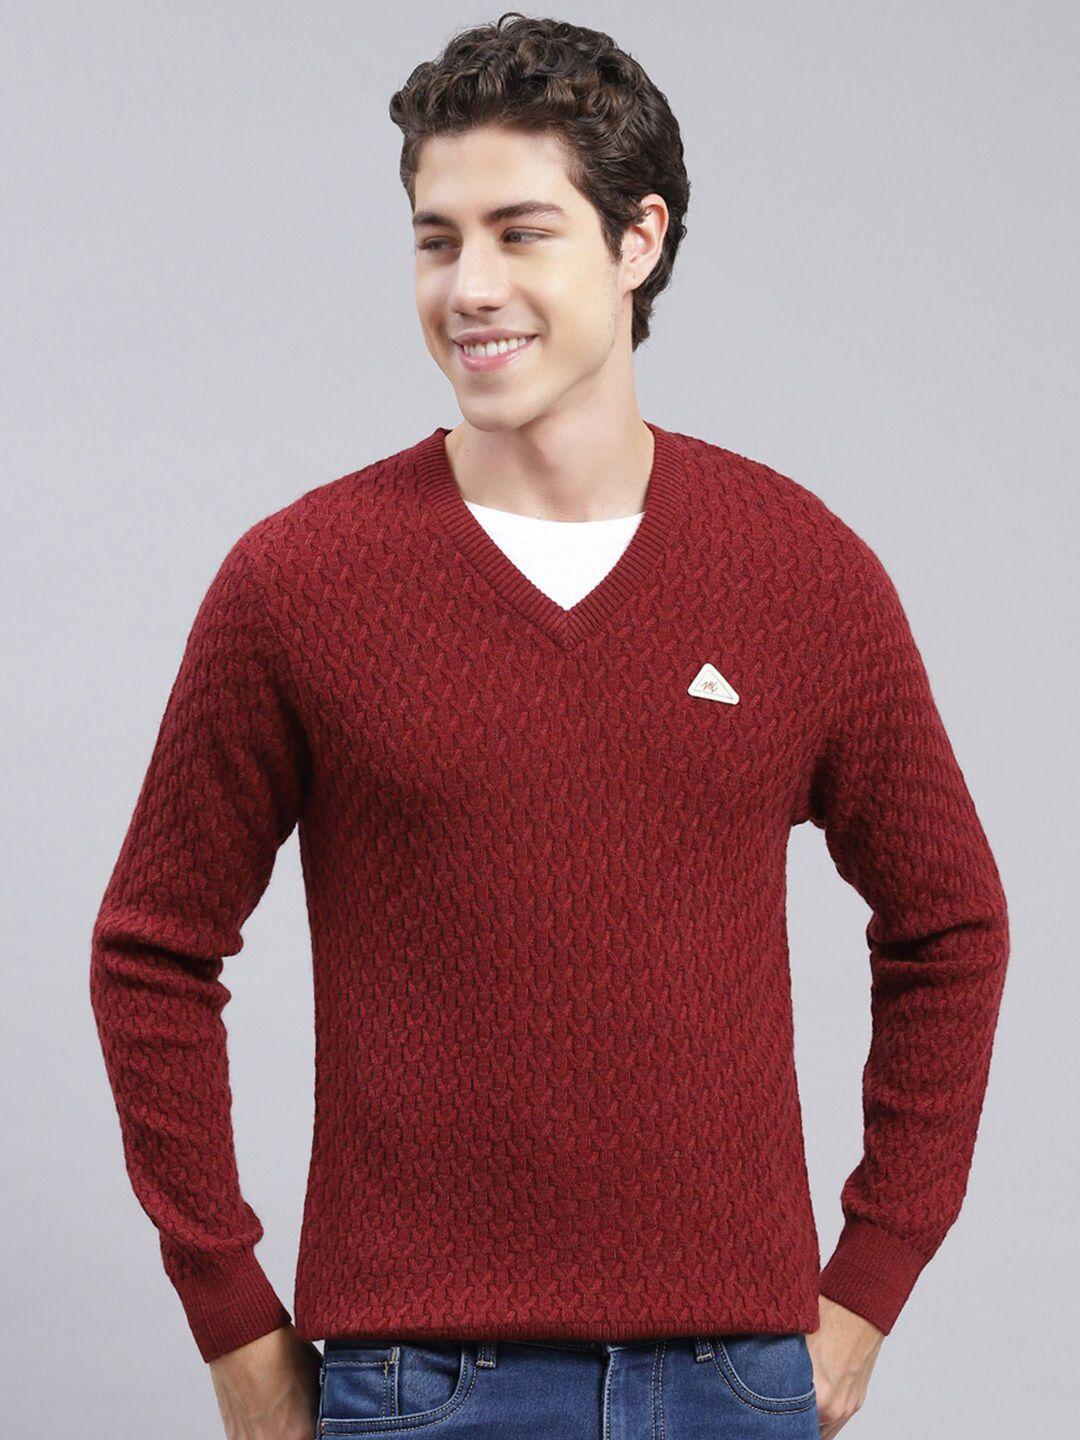 monte-carlo-self-design-cable-knit-woollen-pullover-sweaters